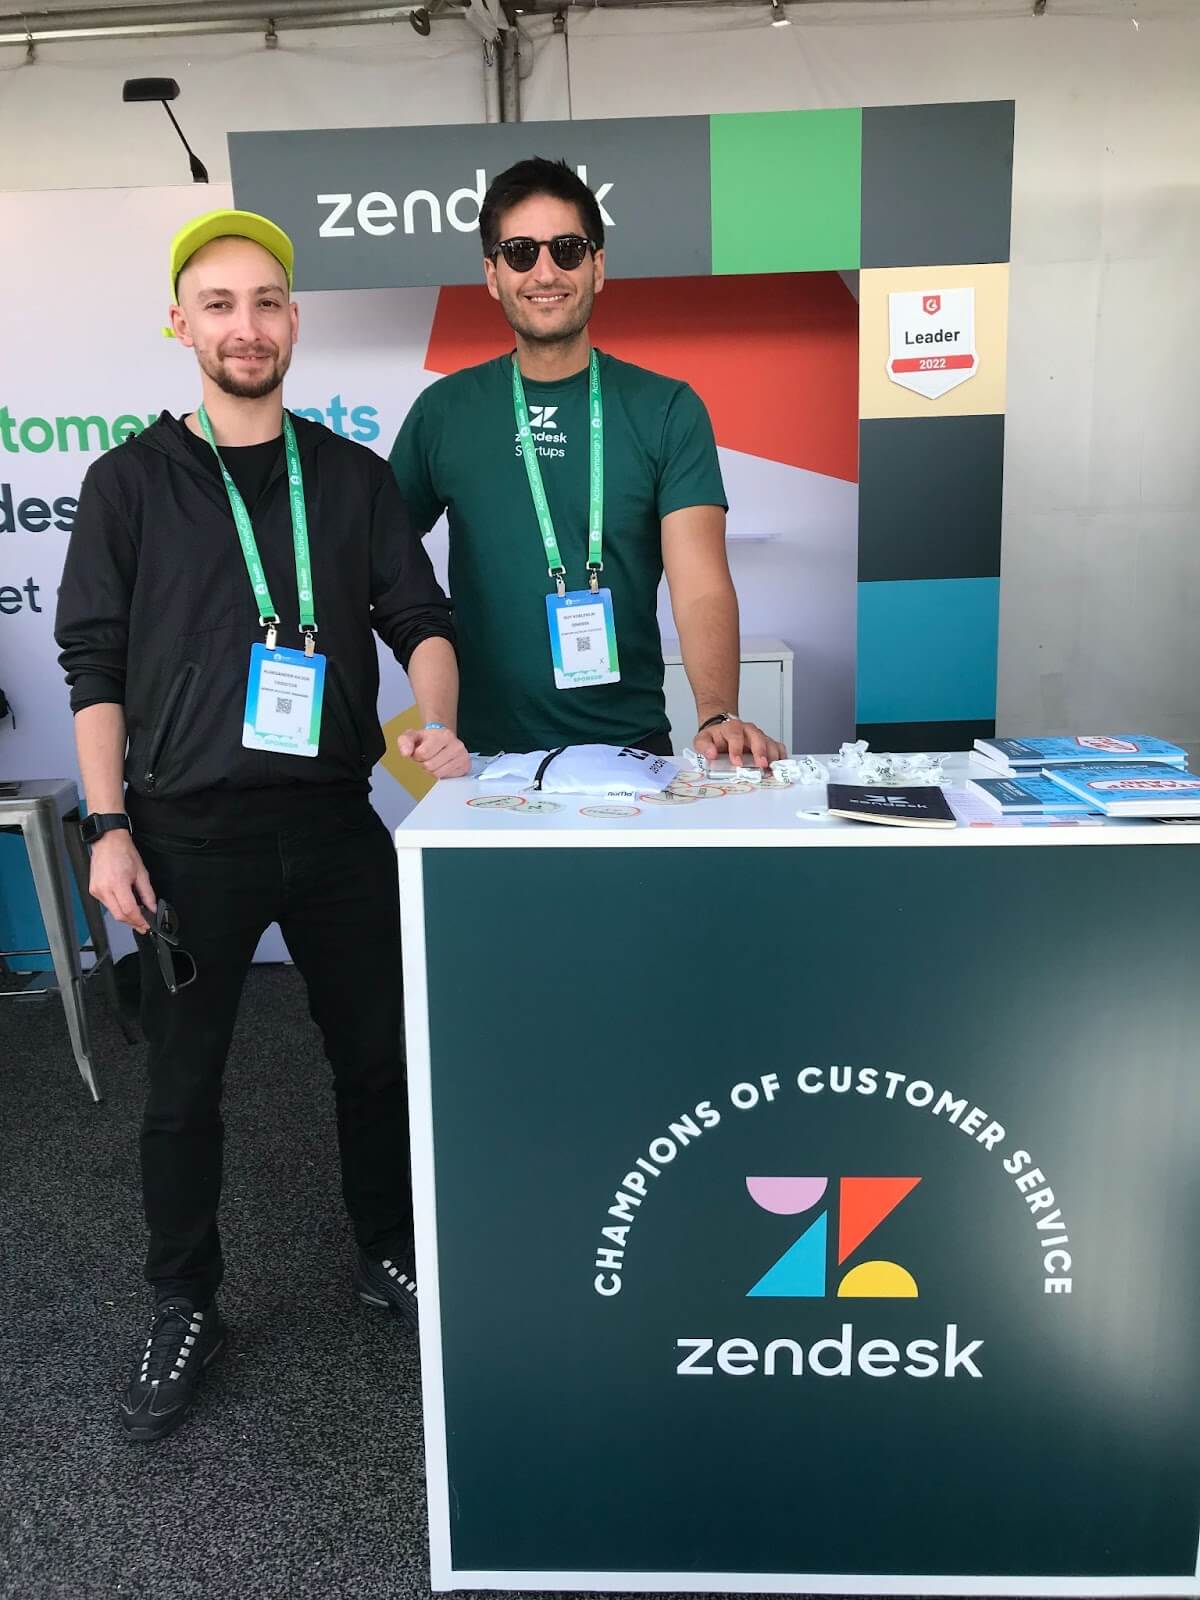 Alex visited Zendesk’s booth at SaaStr Annual 2022 to catch up with the team.